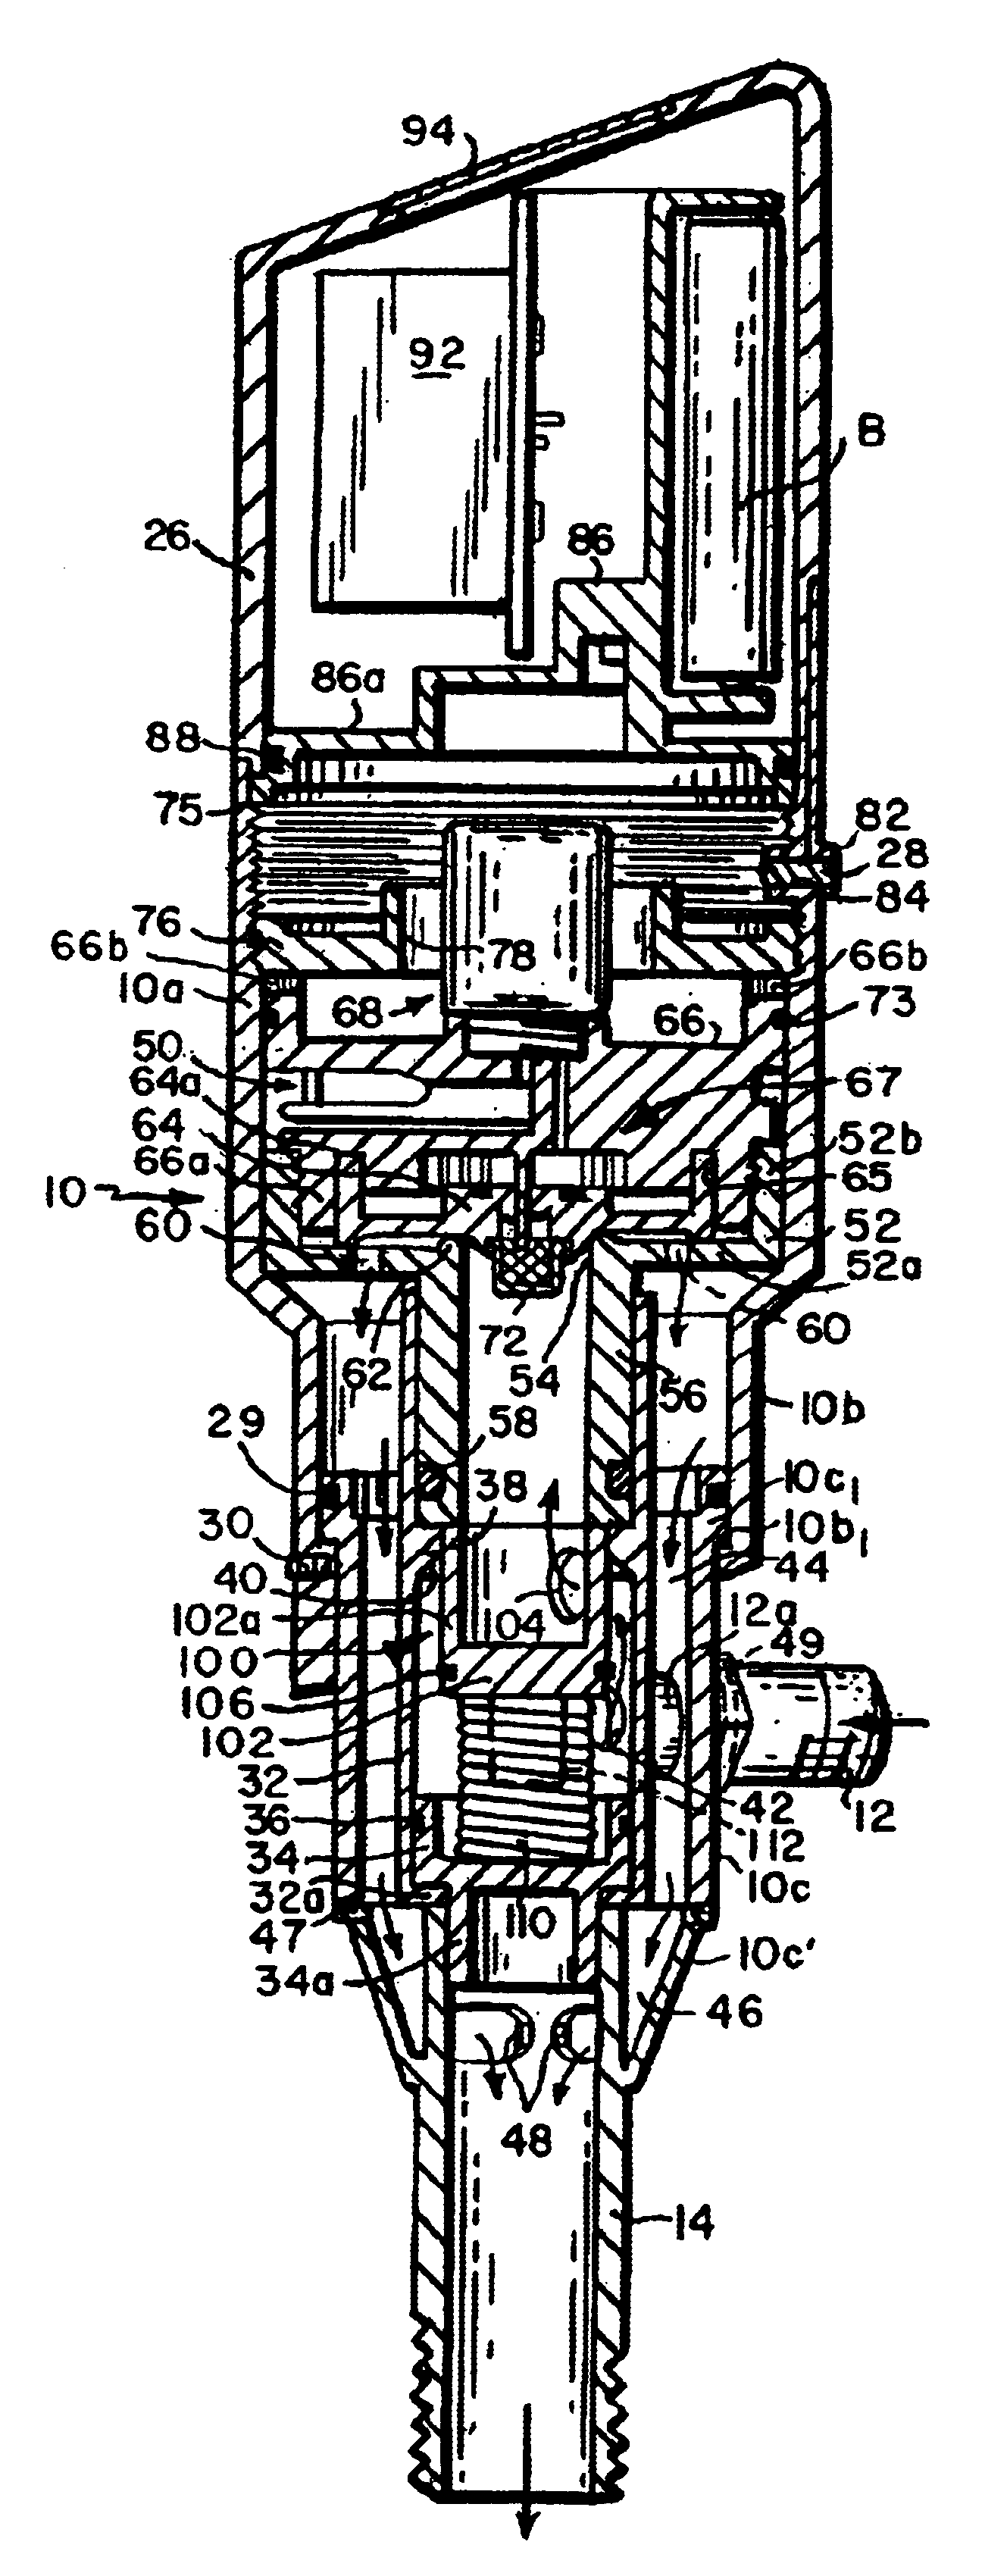 Flow control valve with automatic shutoff capability